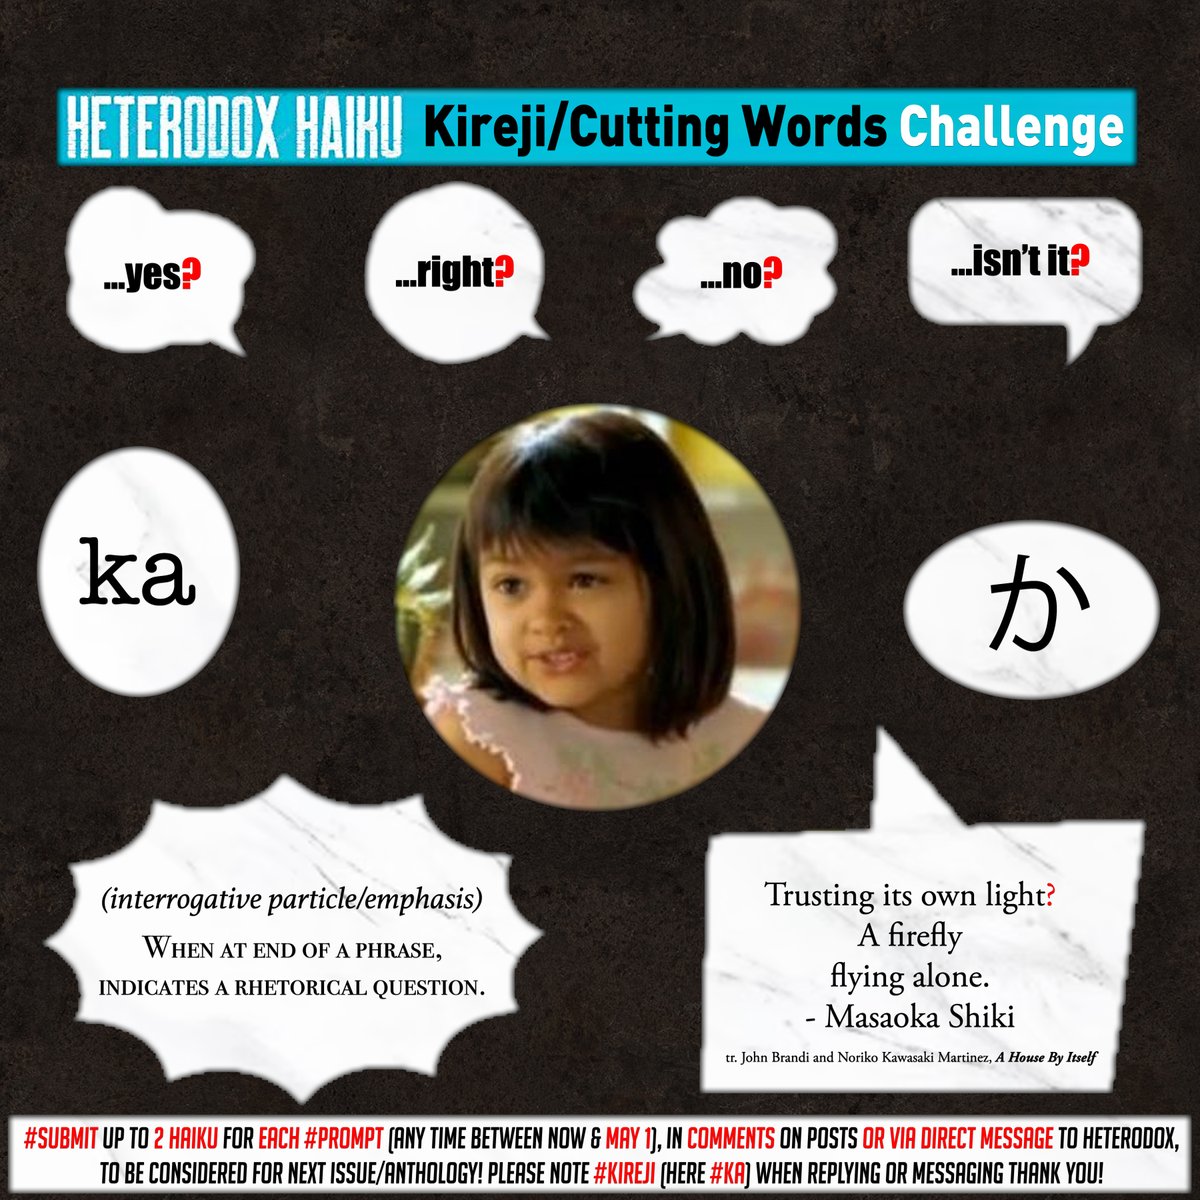 #SubsOpen! 

 1st #Prompt challenge (1/18) for #CuttingWords issue/anthology is for #Kireji of #Ka!! 

Considered a 'question mark pronounced'❓, before May 1 #submit up to 2 #haiku or #senryu incorporating #ka as 'brief cut' or 'dignified ending' to #micropoem for consideration!